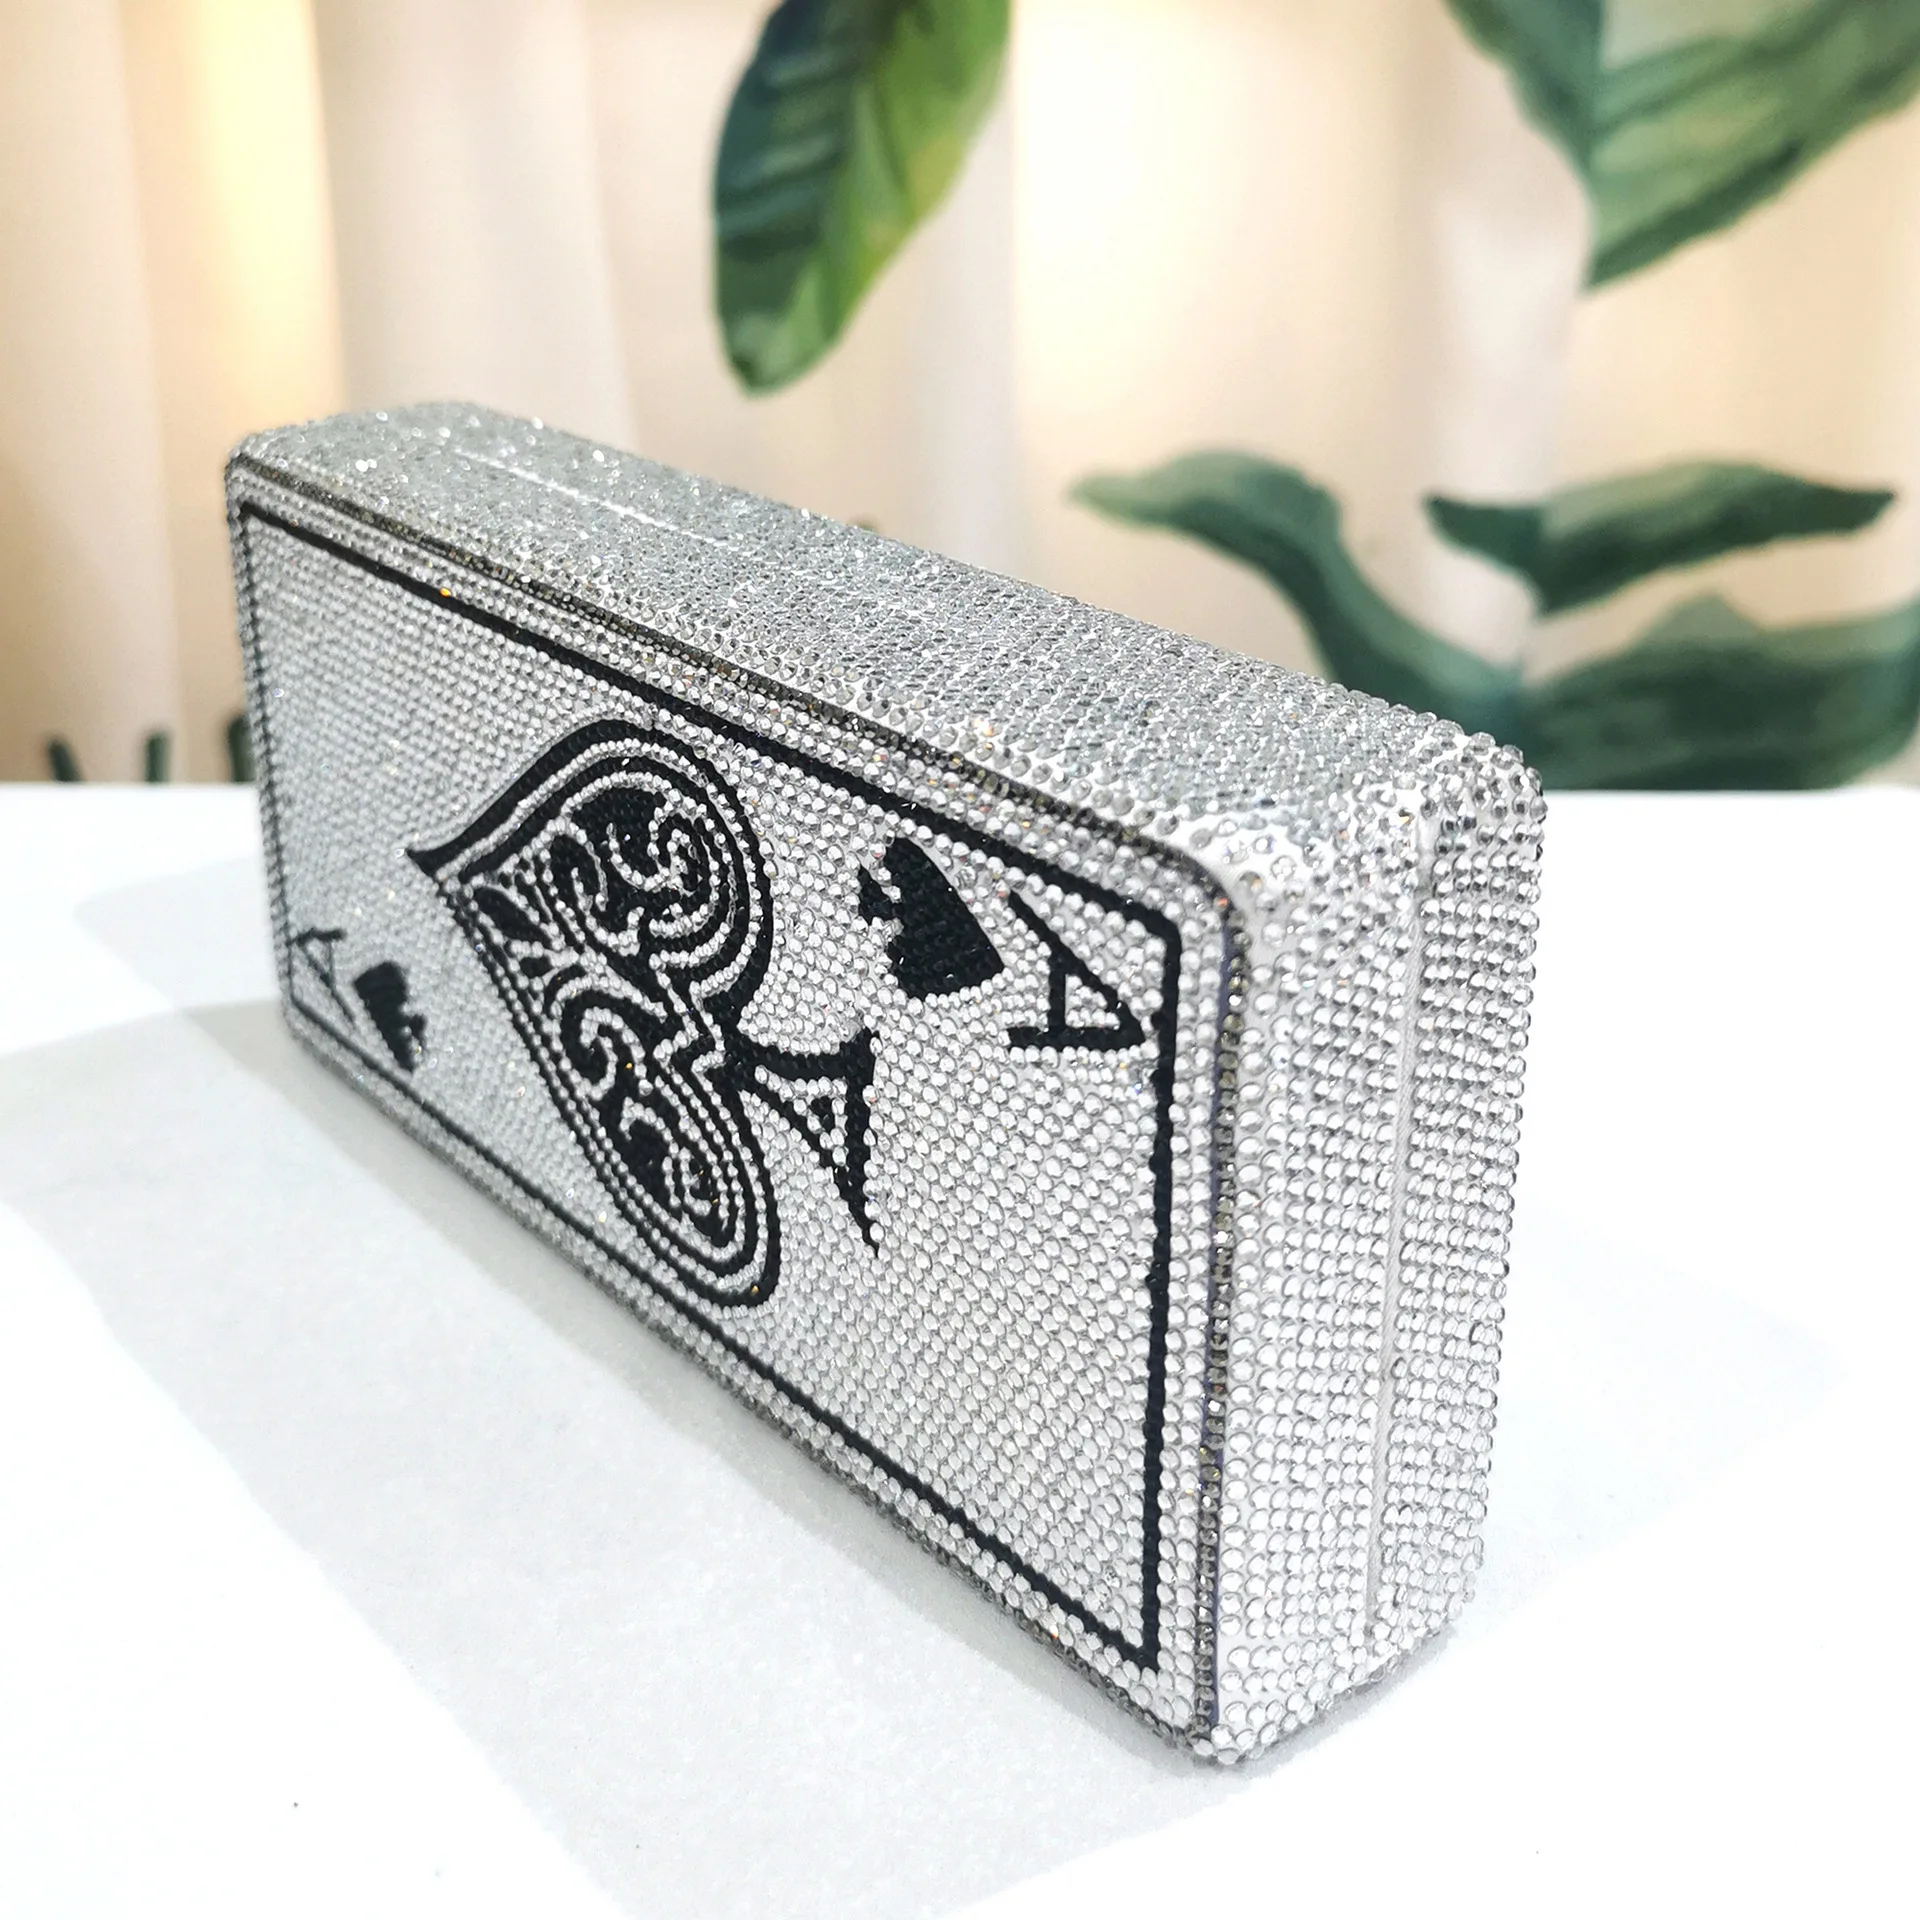 

Ace Of Spades Diamonds Metal Evening Bags Hollow Out Shiny Clutch Purse And Handbag For Dinner Party 2020 New Designer Luxury, As pictures